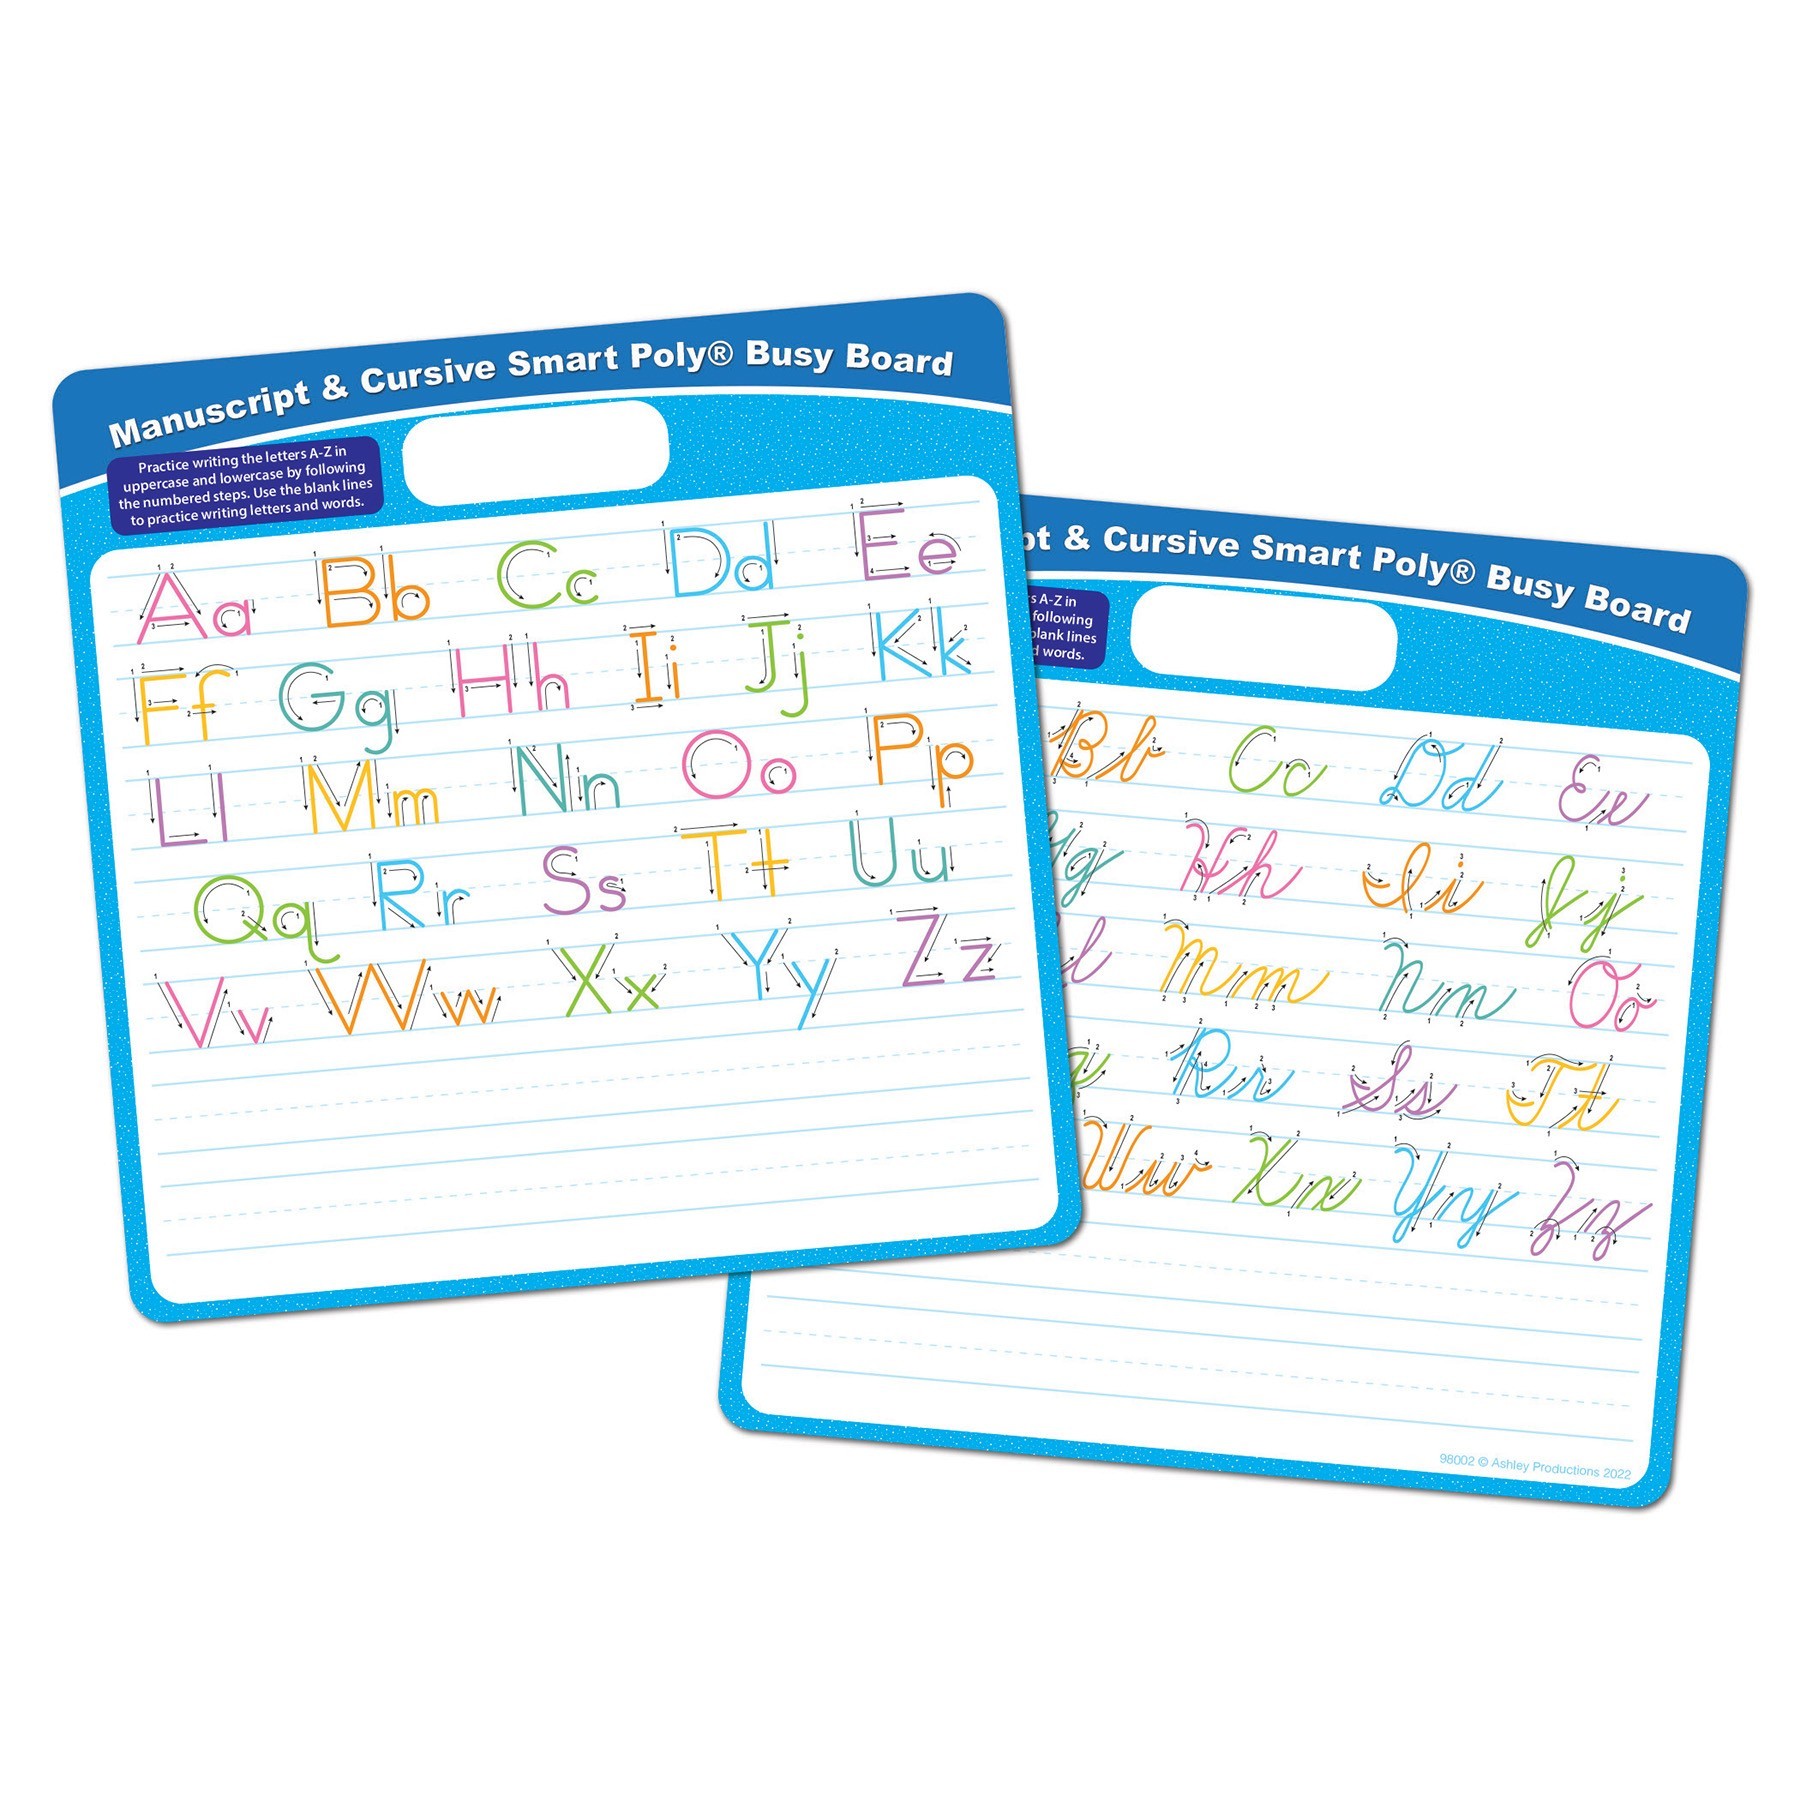 Smart Poly Educational Activity Busy Board, Dry Erase with Marker, 10-3/4" x 10-3/4", Manuscript/Cursive